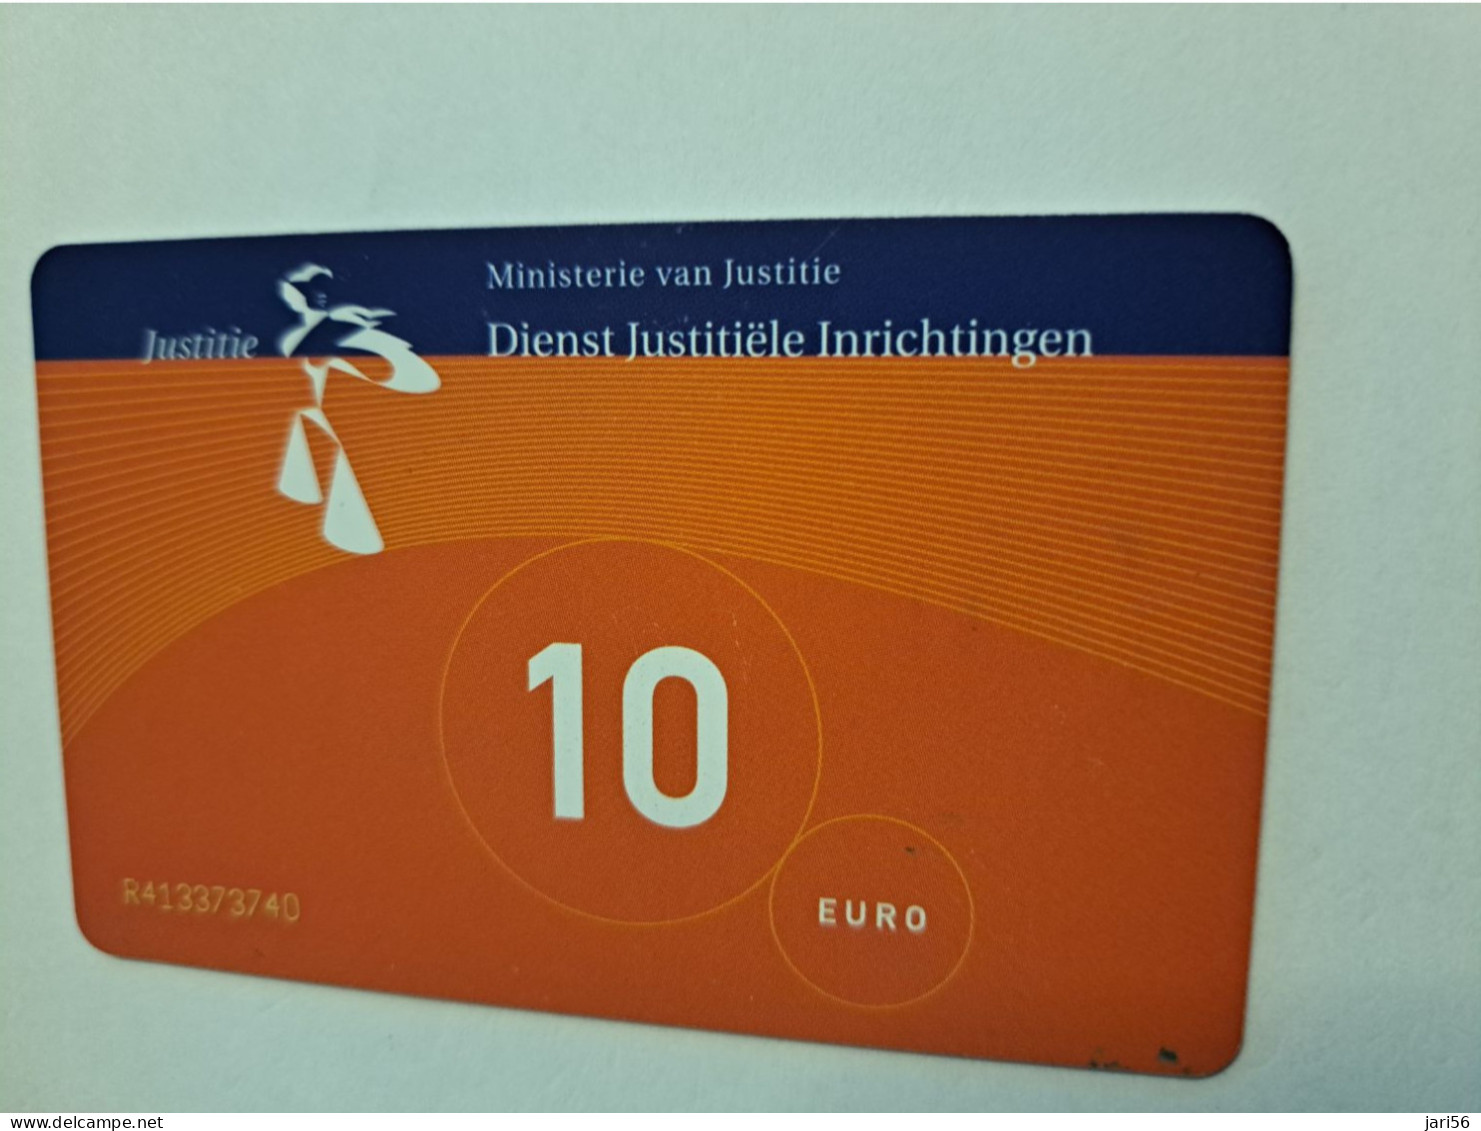 NETHERLANDS   € 10,-  ,-  / USED  / DATE  01-01/09  JUSTITIE/PRISON CARD  CHIP CARD/ USED   ** 16025** - [3] Sim Cards, Prepaid & Refills